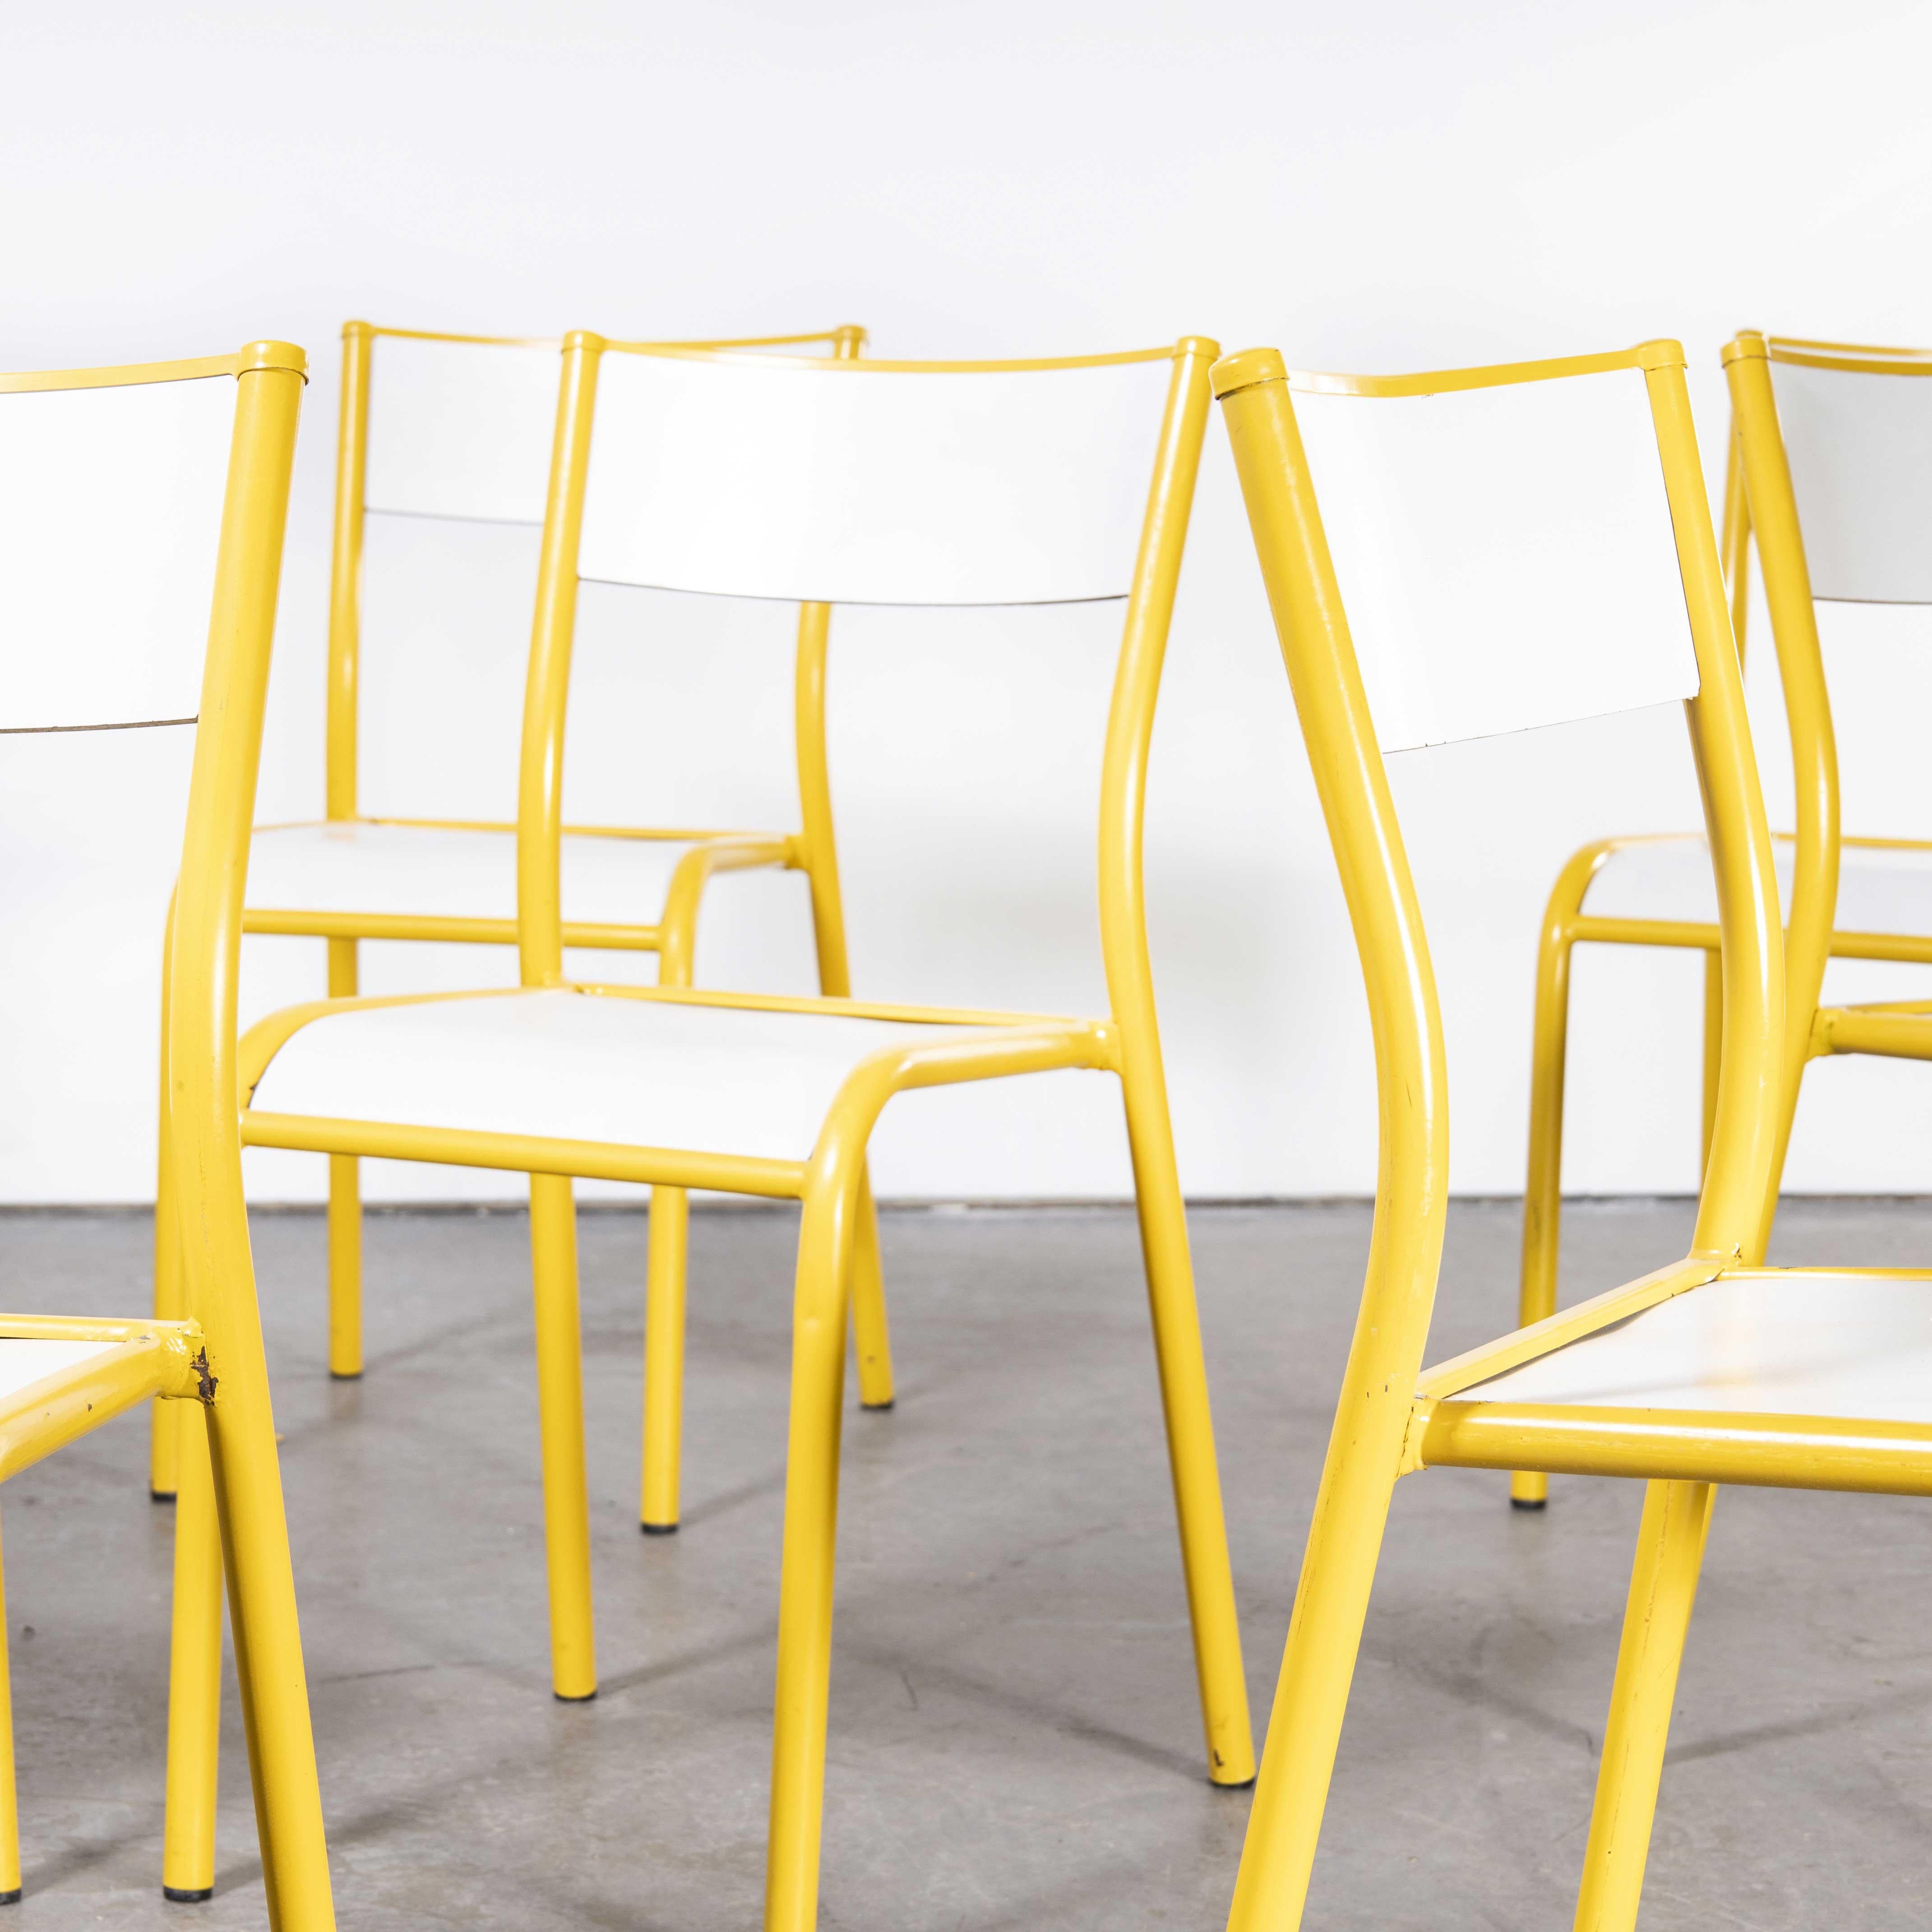 1970’s yellow mullca stacking dining chair – set of six
1970’s yellow mullca stacking dining chair – set of six. One of our most favourite chairs, in 1947 Robert Muller and Gaston Cavaillon created the company that went on to develop arguably the